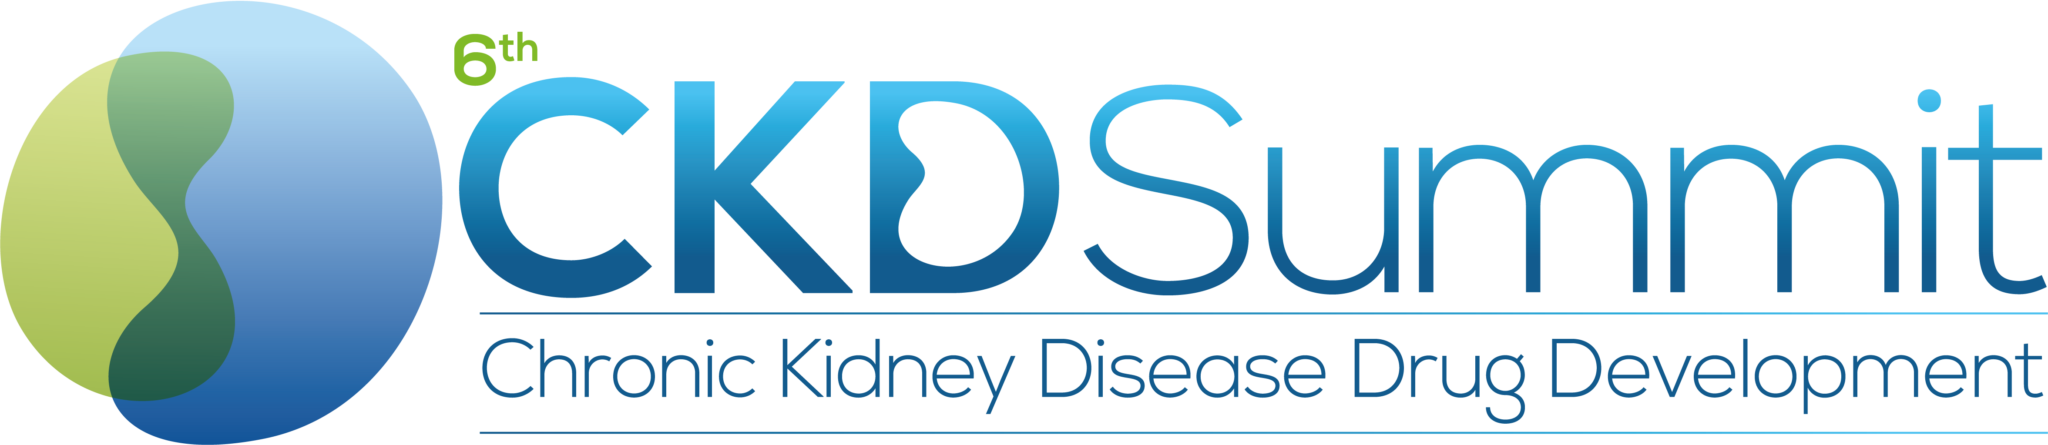 Events in Series, 6th CKD Summit